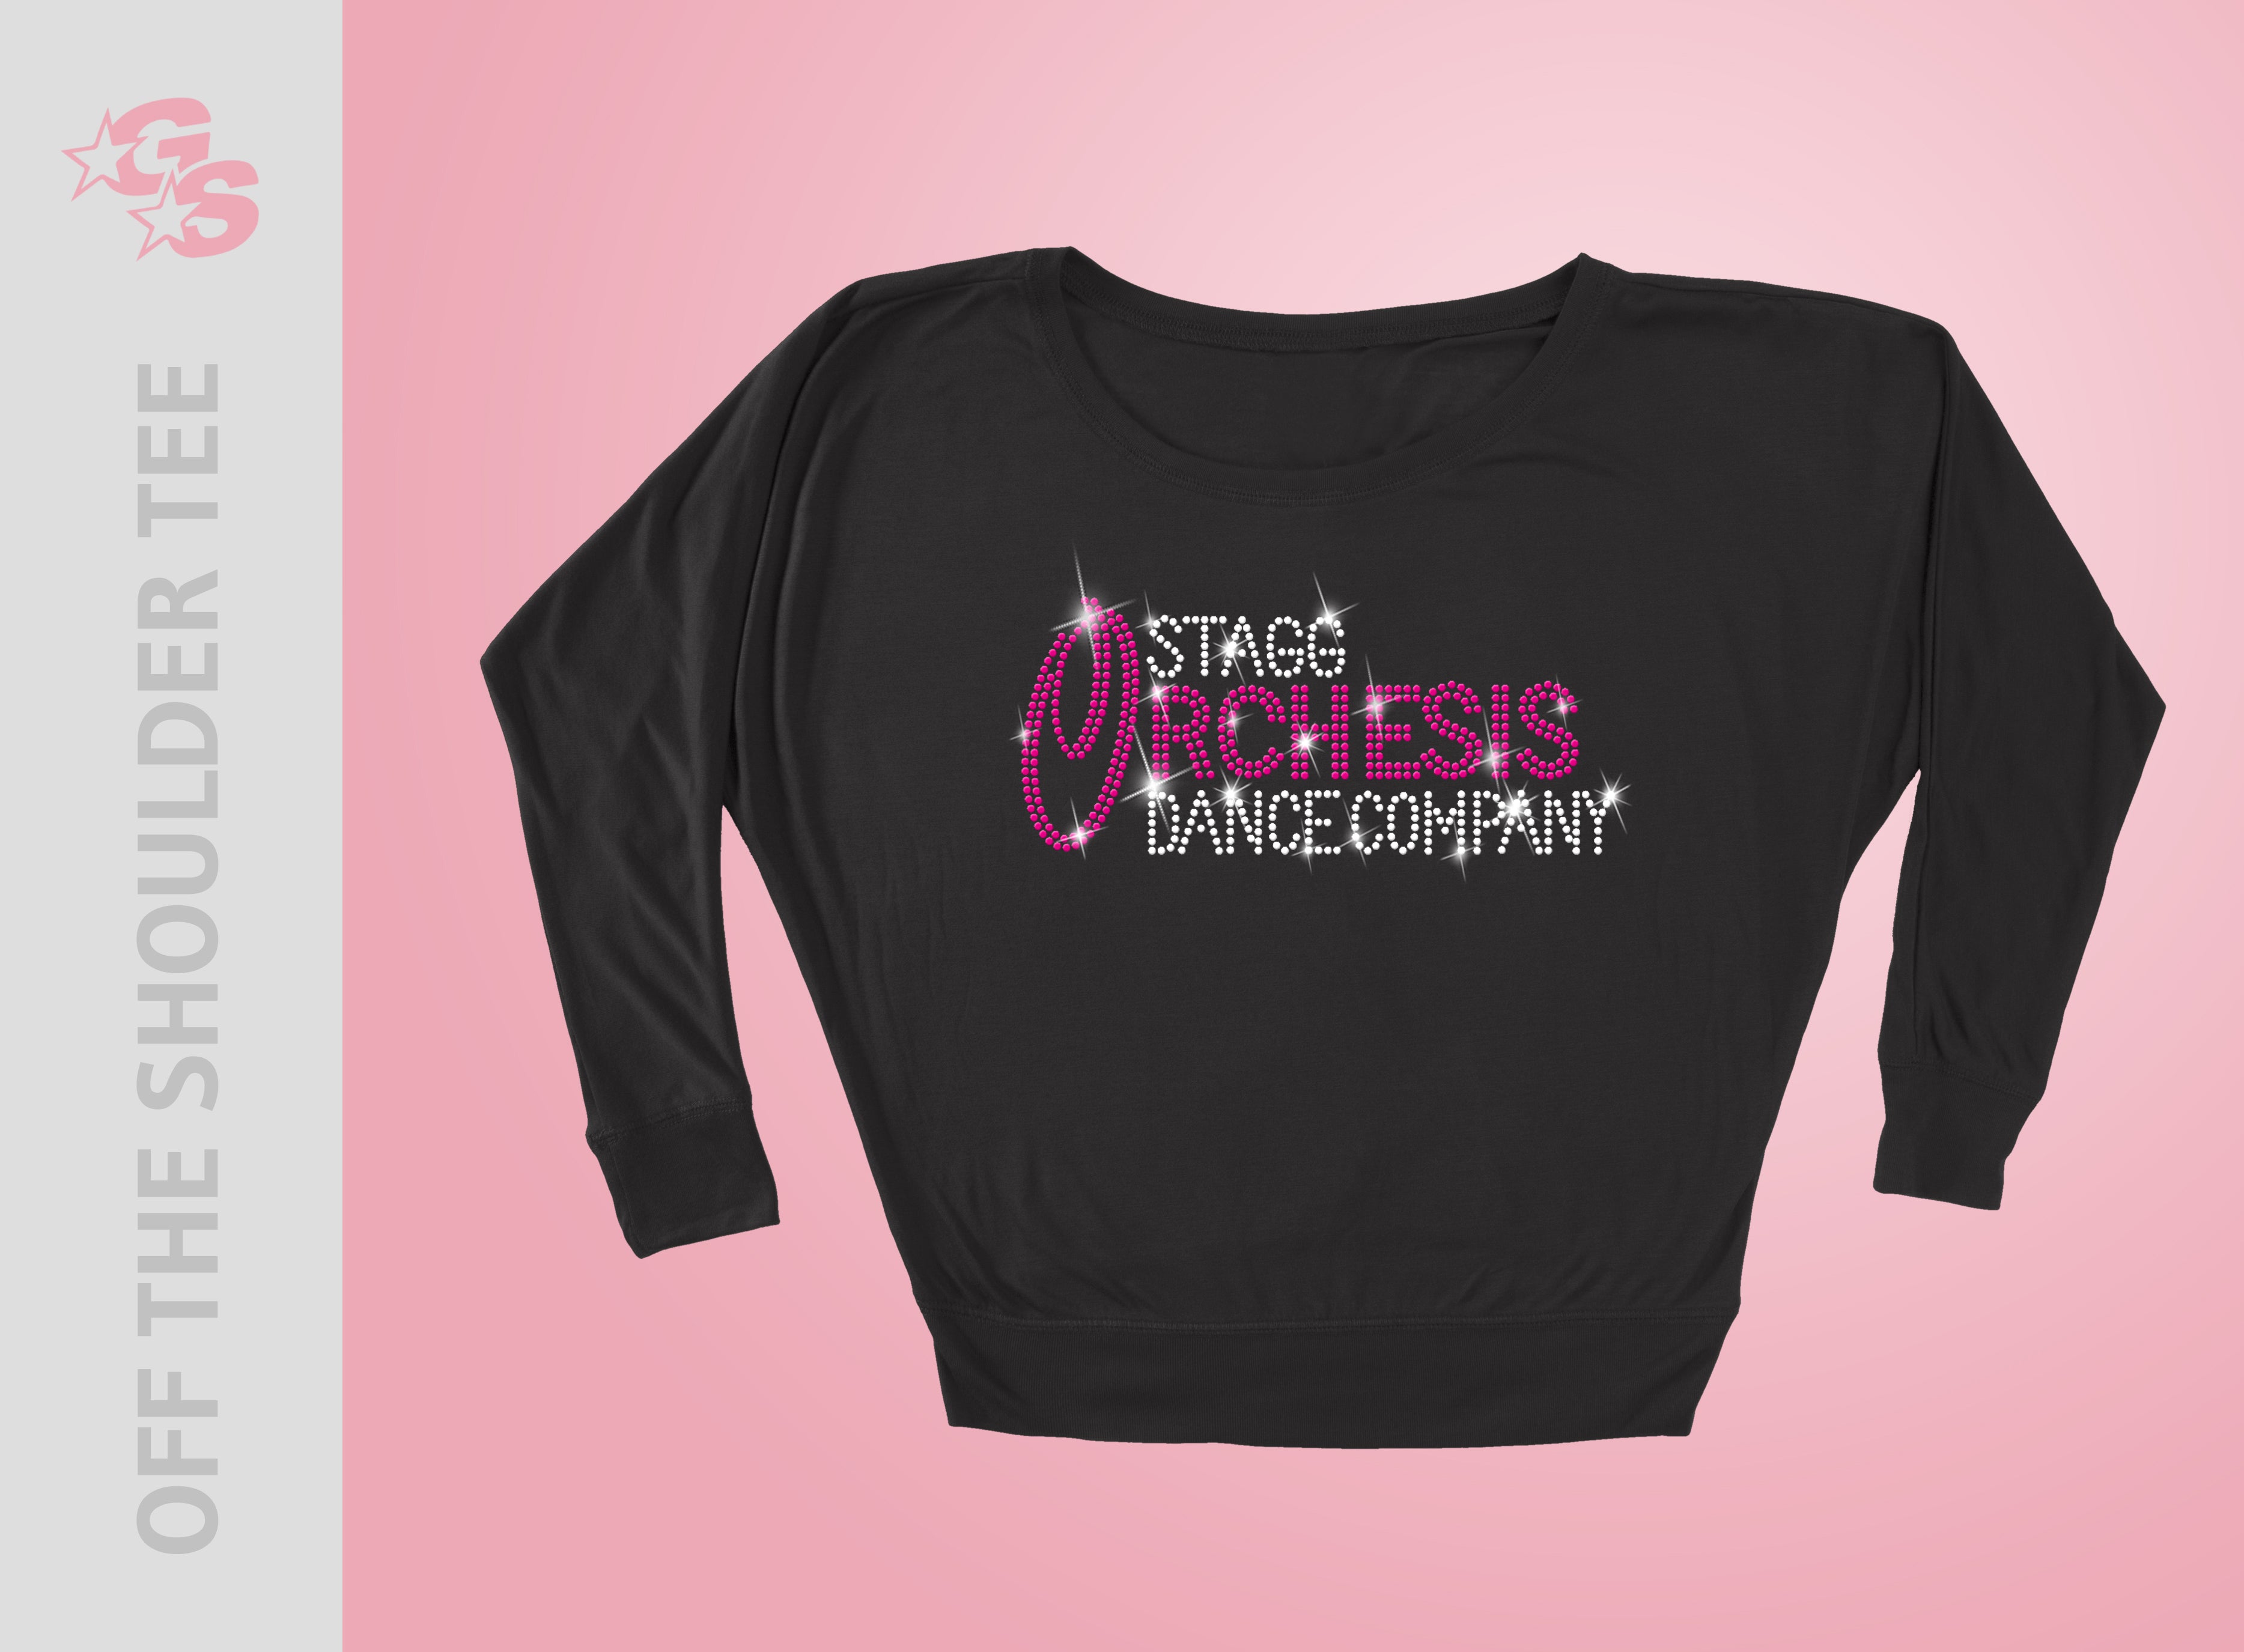 Stagg Orchesis Dance Company Off the Shoulder Tee - Women's - Bling Logo